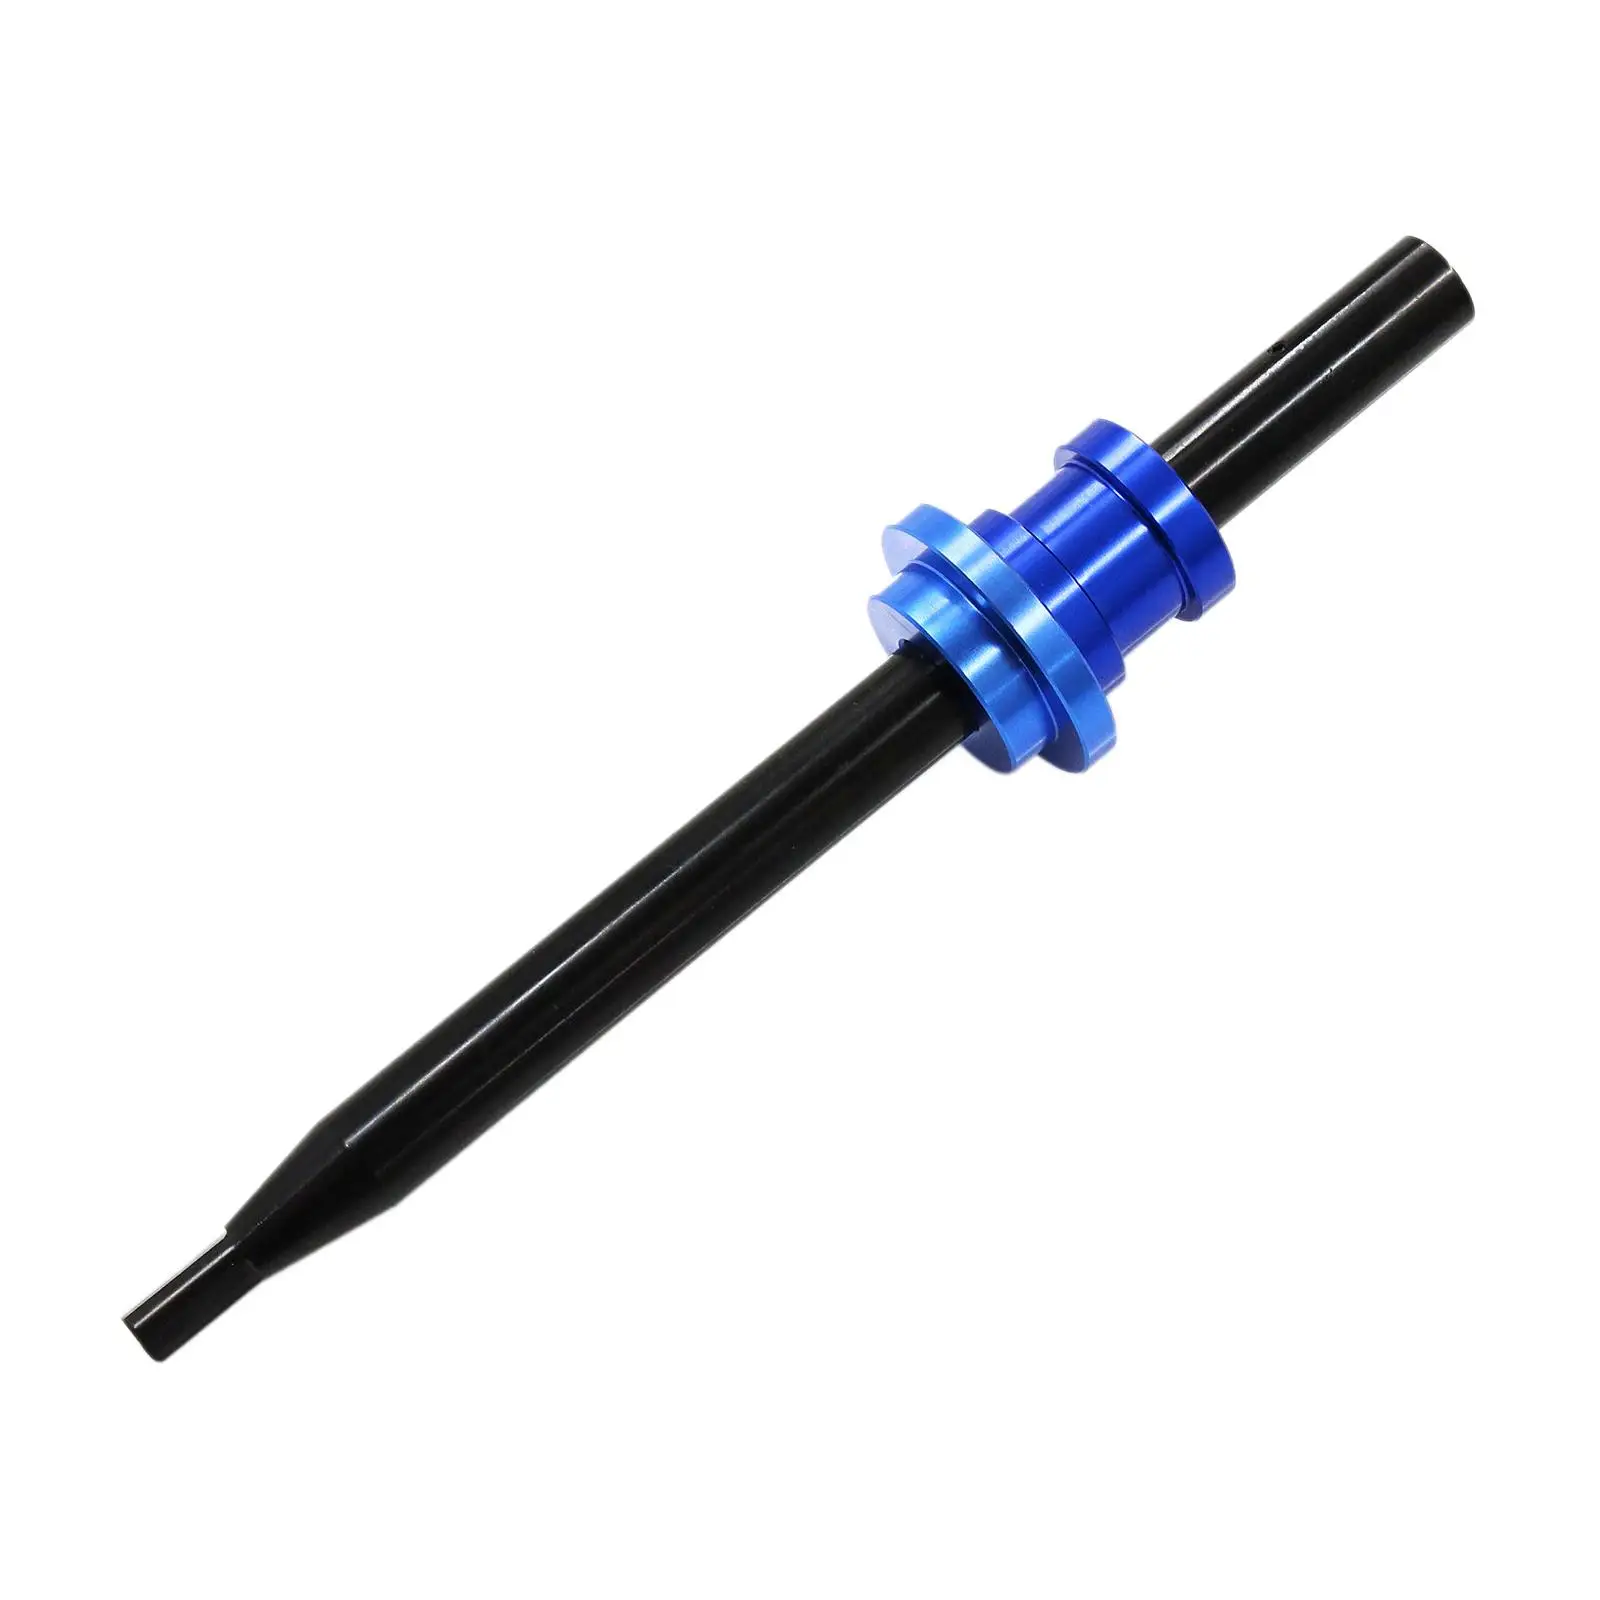 

Oil Pump Primer Tool Easily Install Replace Parts Stable Accessories Vehicle for GM Chevy Sbc 350 V8 V6 454 Bbc